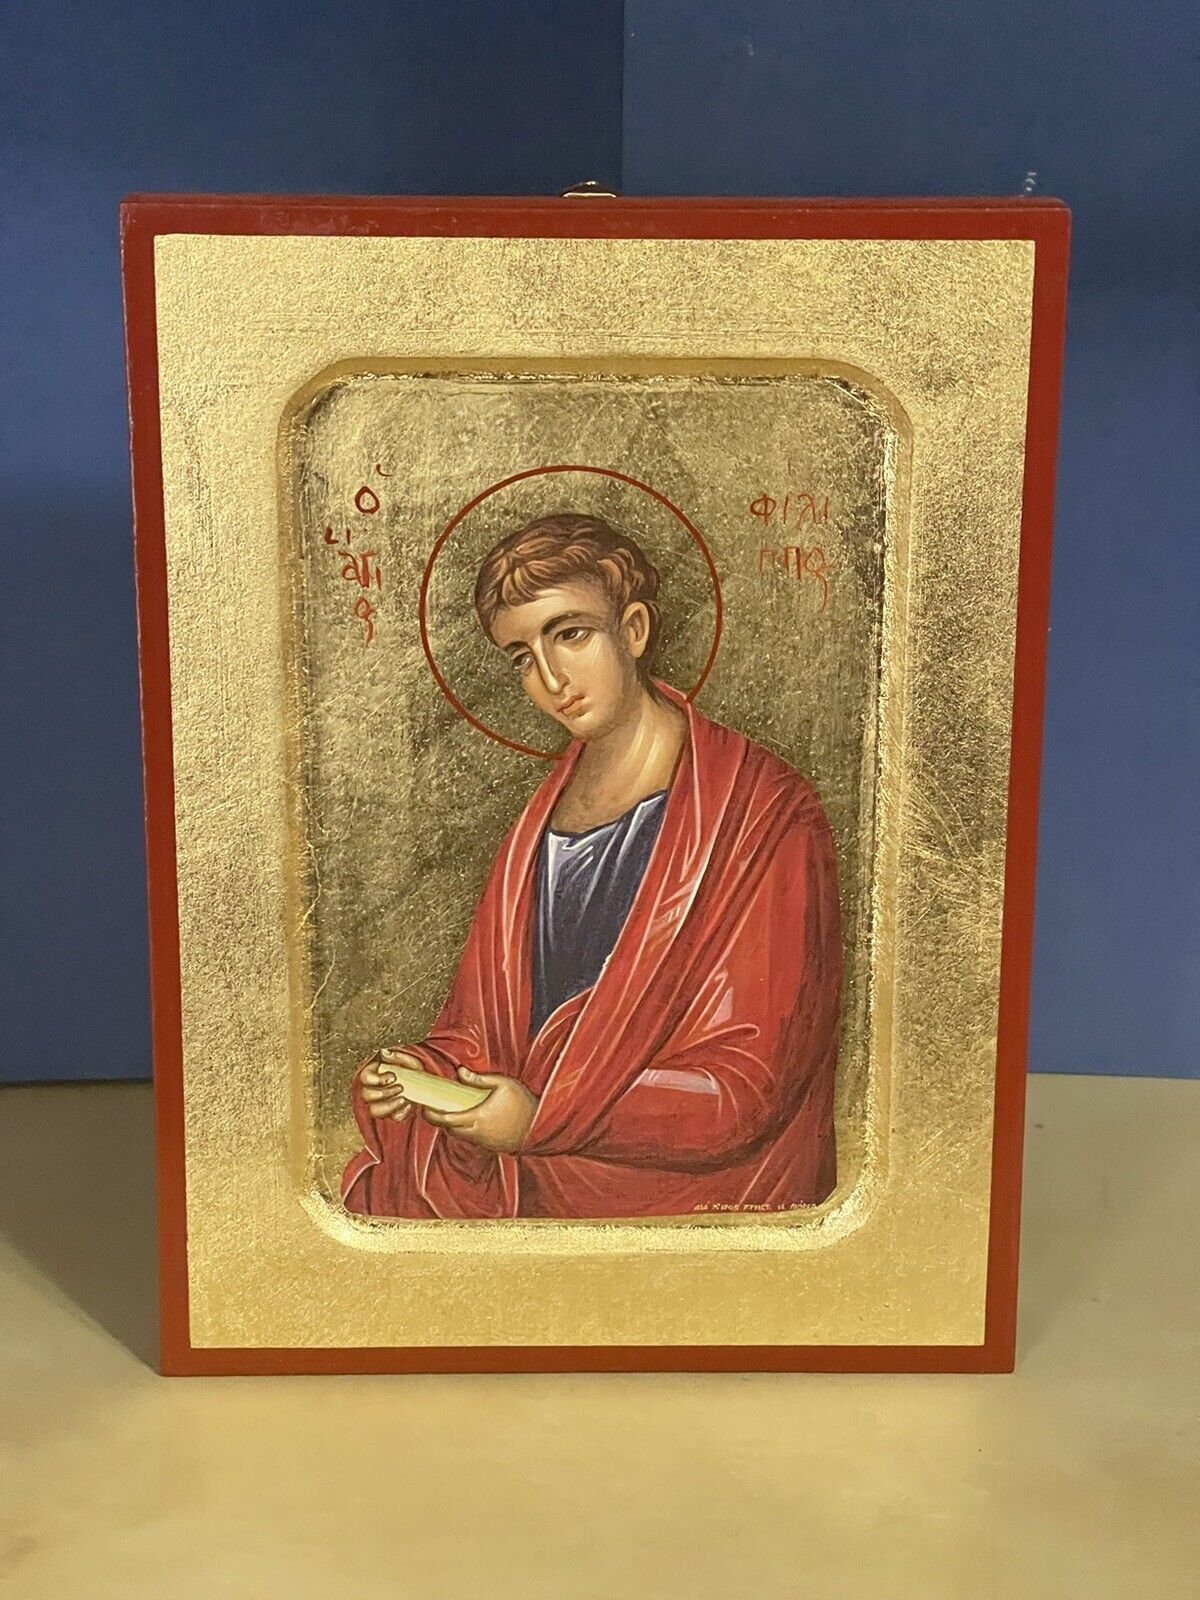 Saint Philip -ORTHODOX WOODEN ICON, CARVED WITH GILDING 6x8 inch